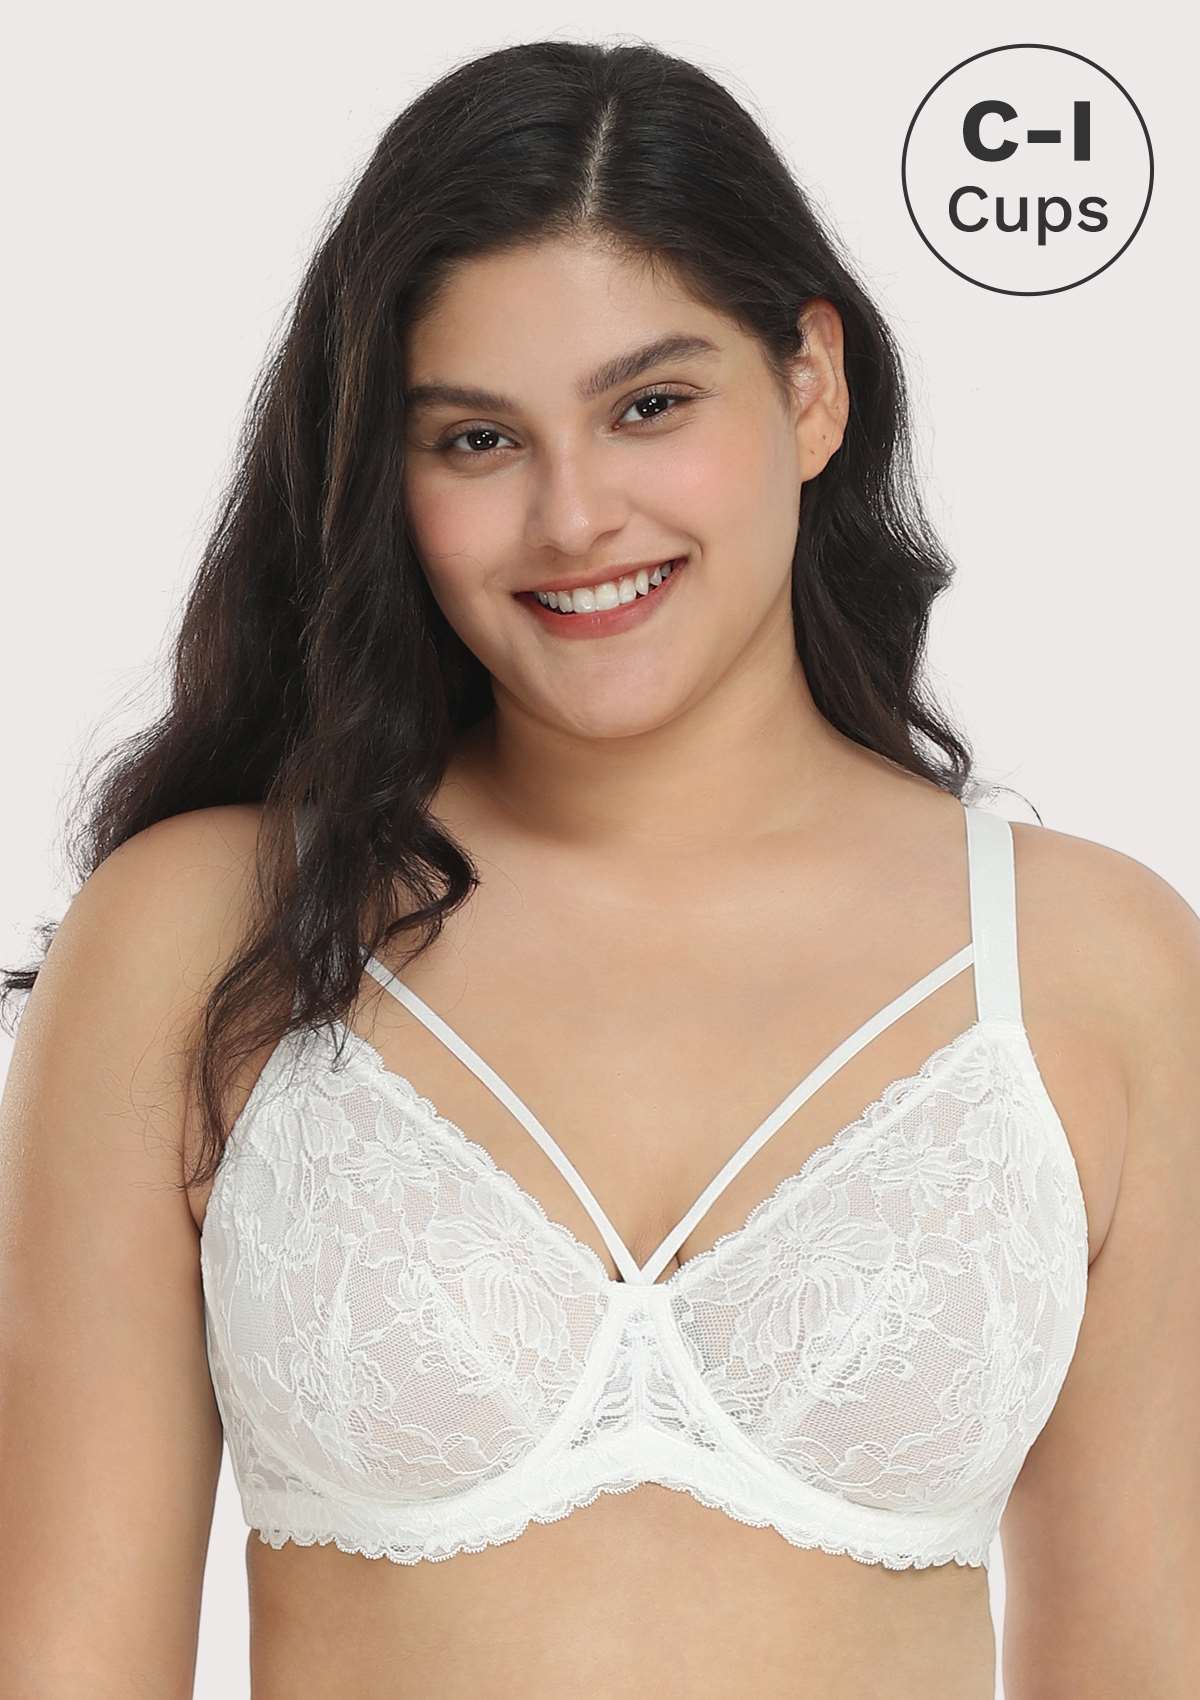 Women's Basic Lace/Plain Lace Bras (Pack of 6)- Various Styles (38B,  BR4235P2)